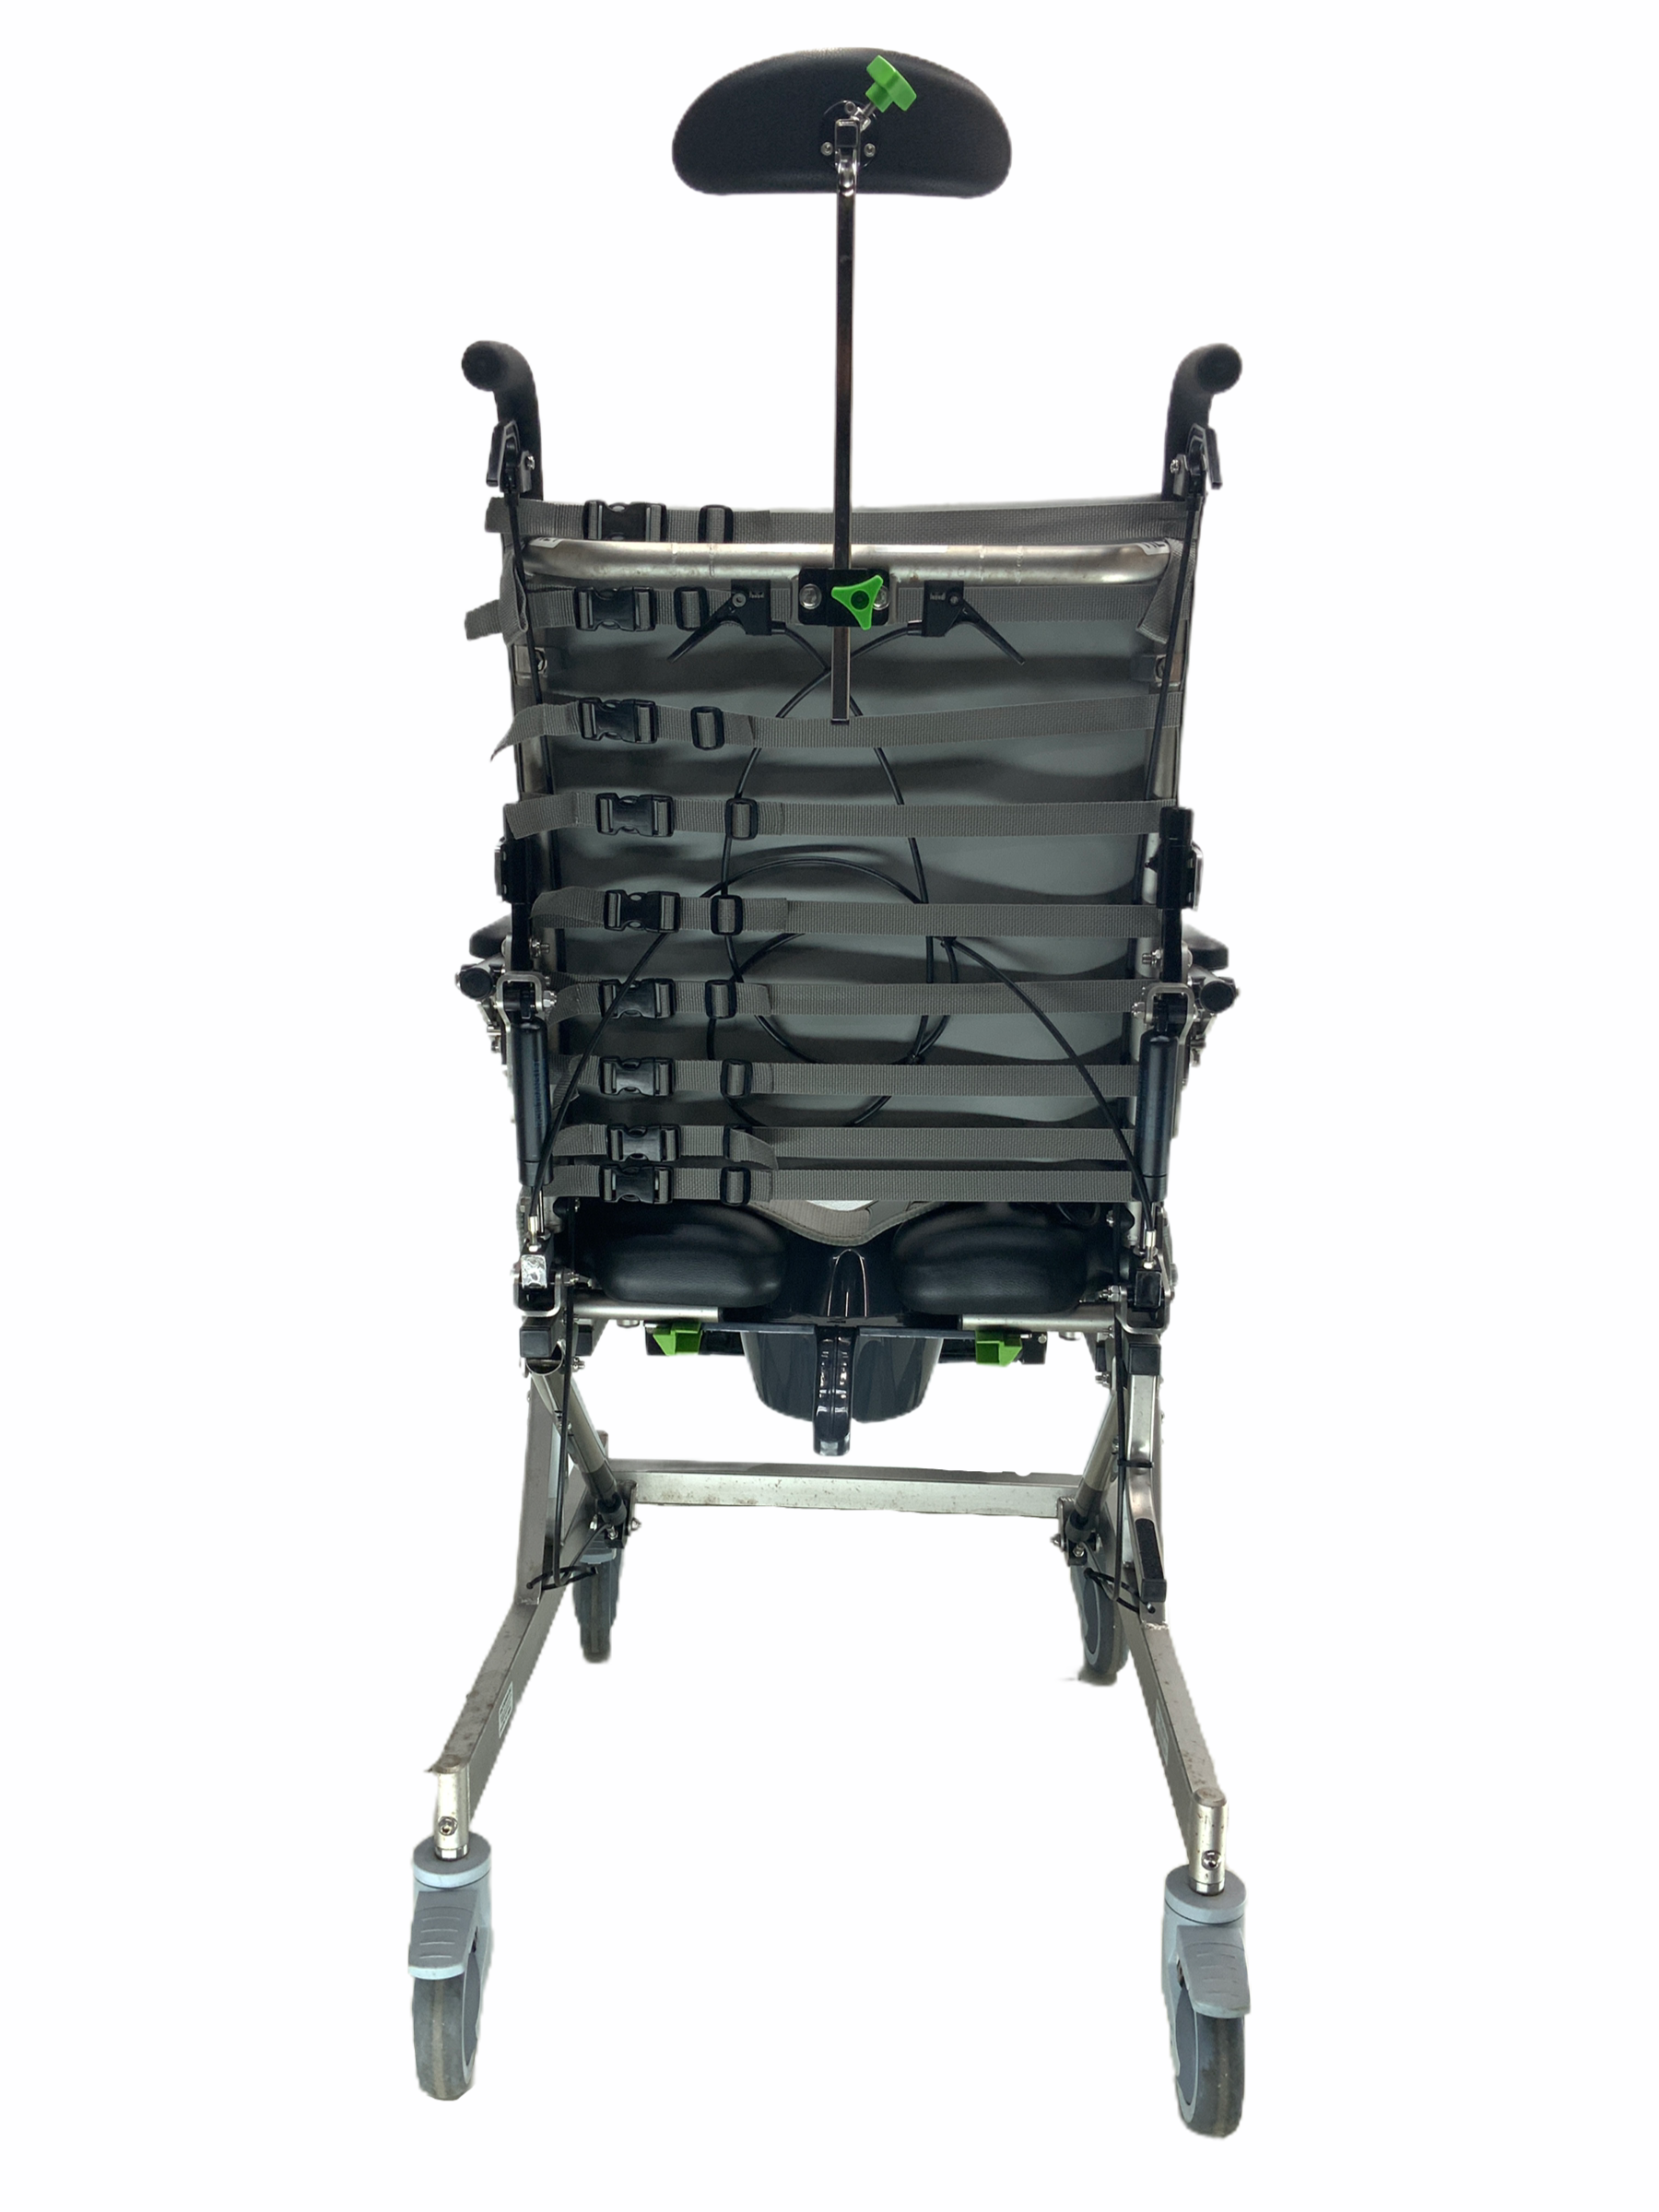 Harmony Backrest, Mobile Shower Commode Chairs